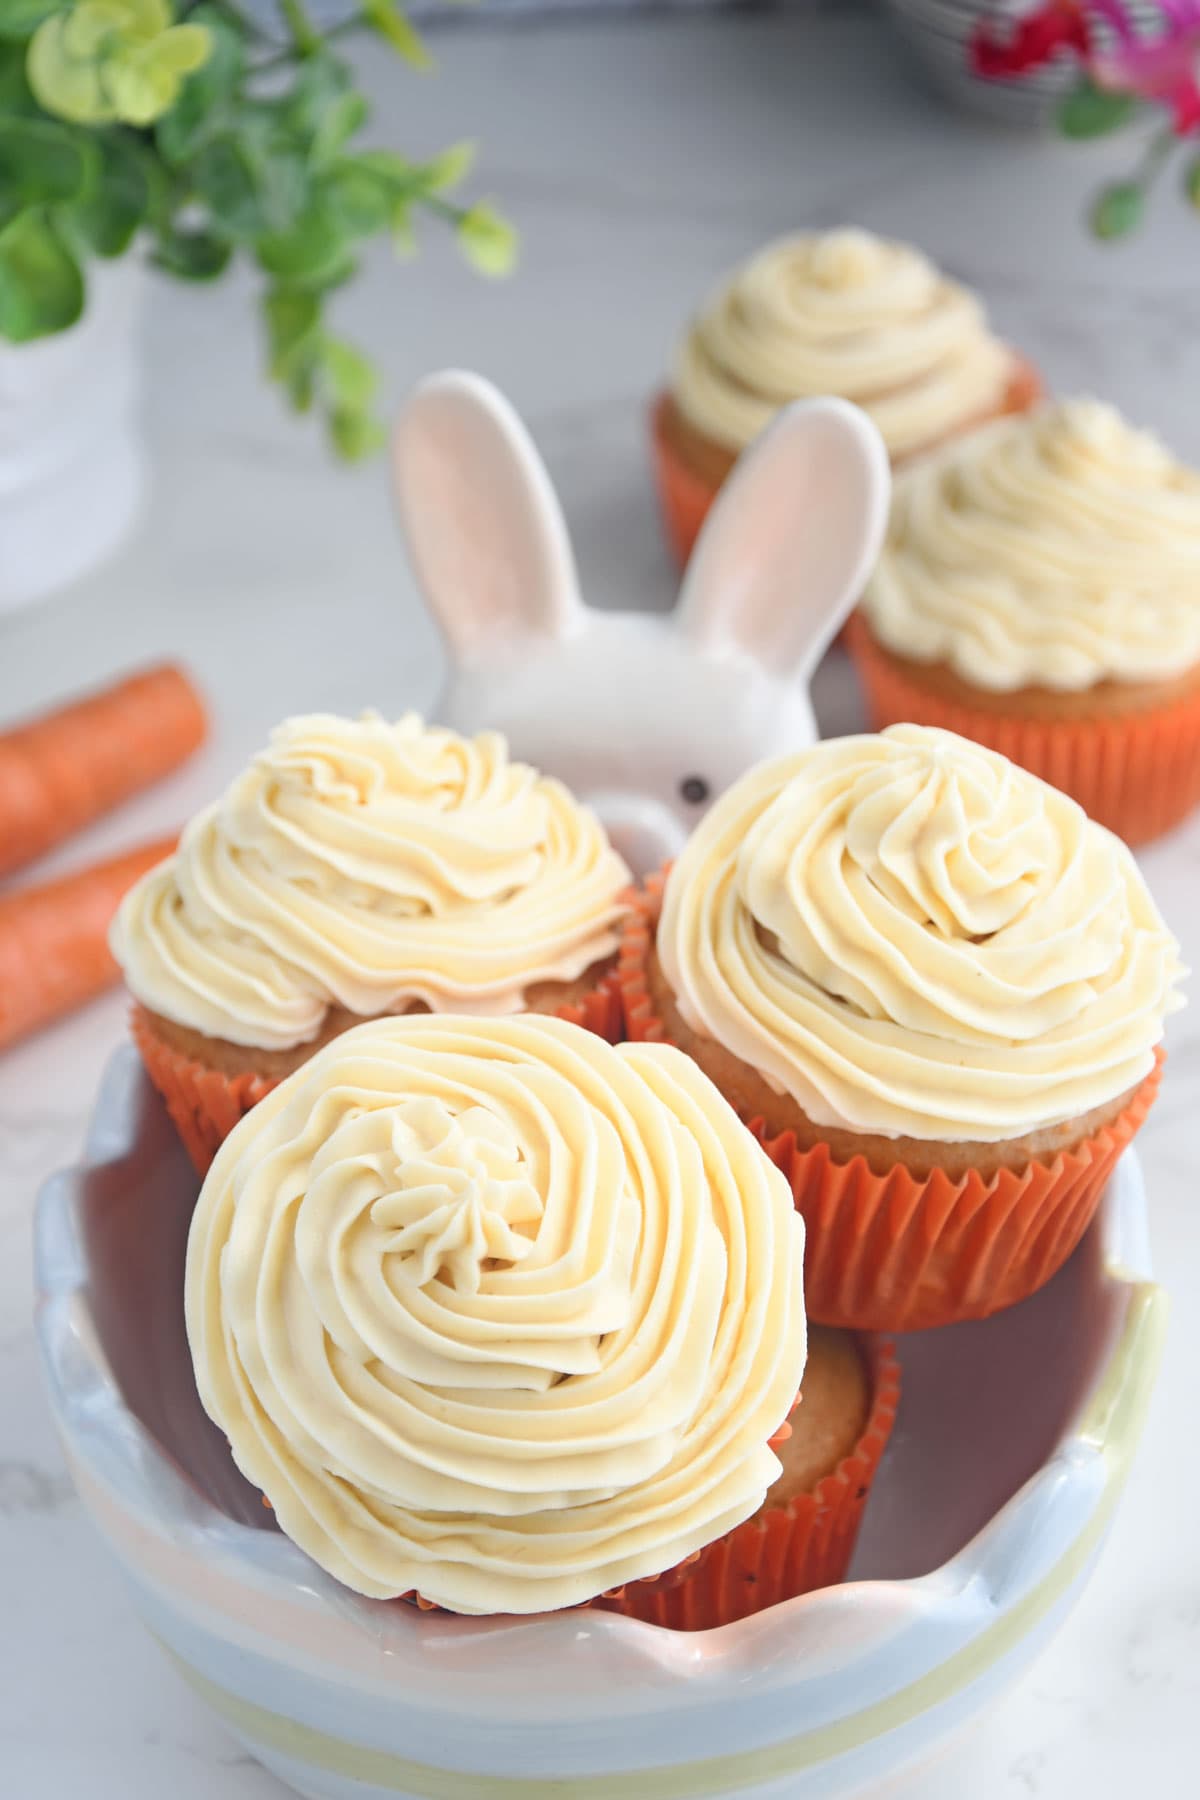 Carrot cupcakes in a decorative bowl.